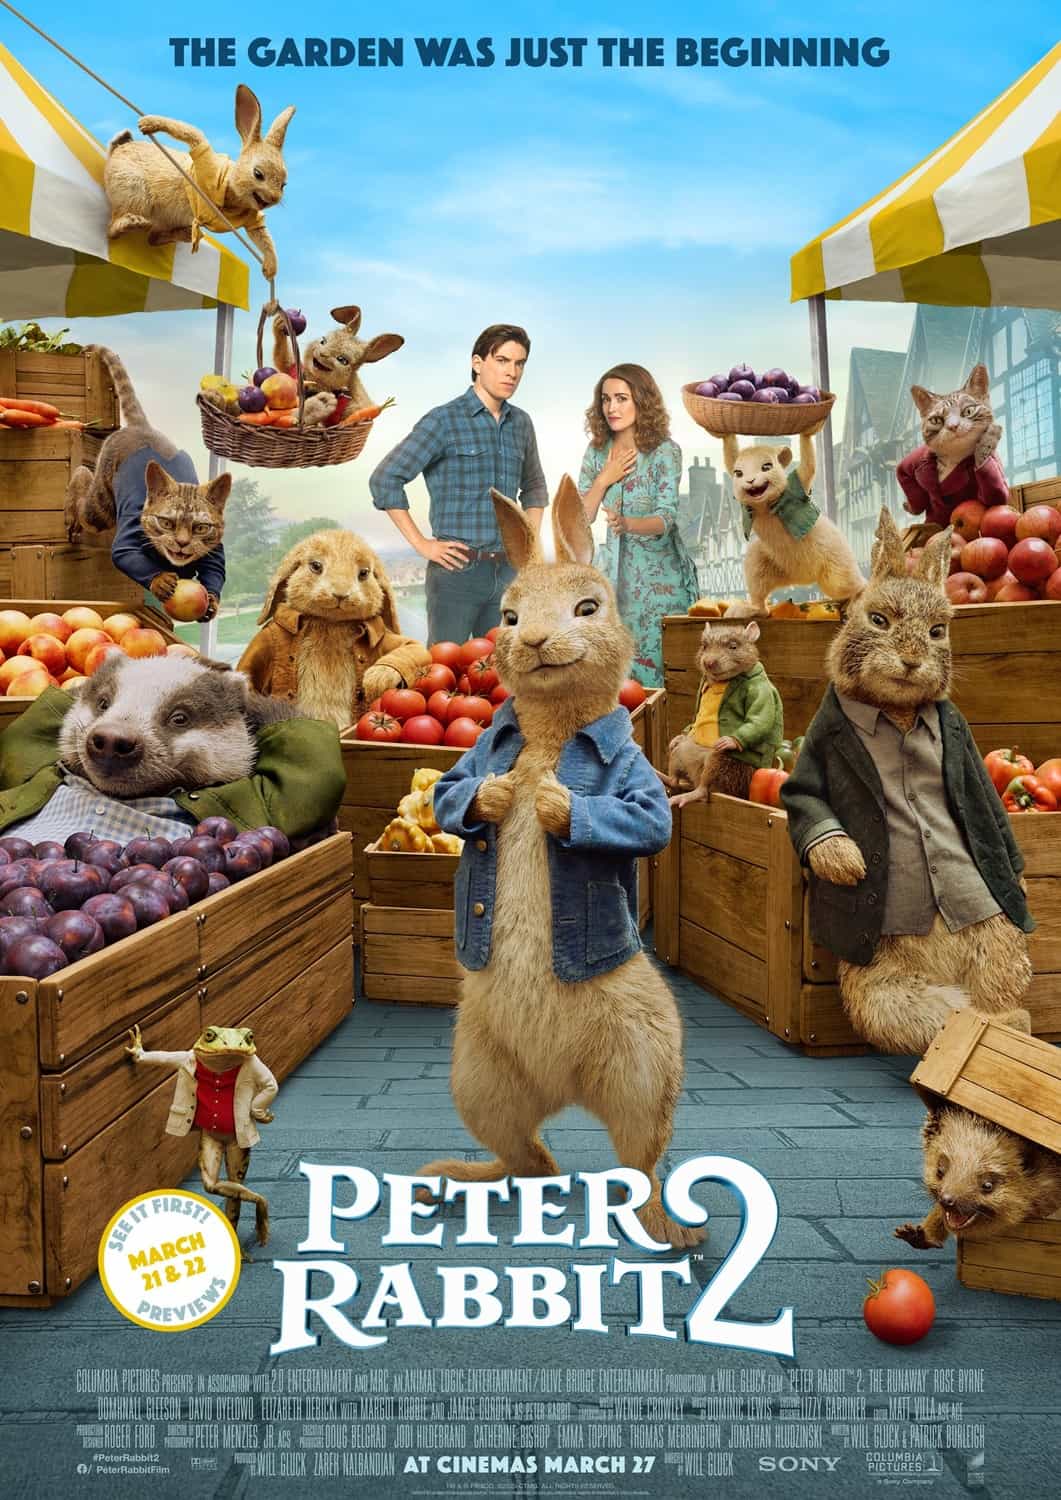 New trailer for animated sequel movie Peter Rabbit 2: The Runaway - film release date 27th March 2020